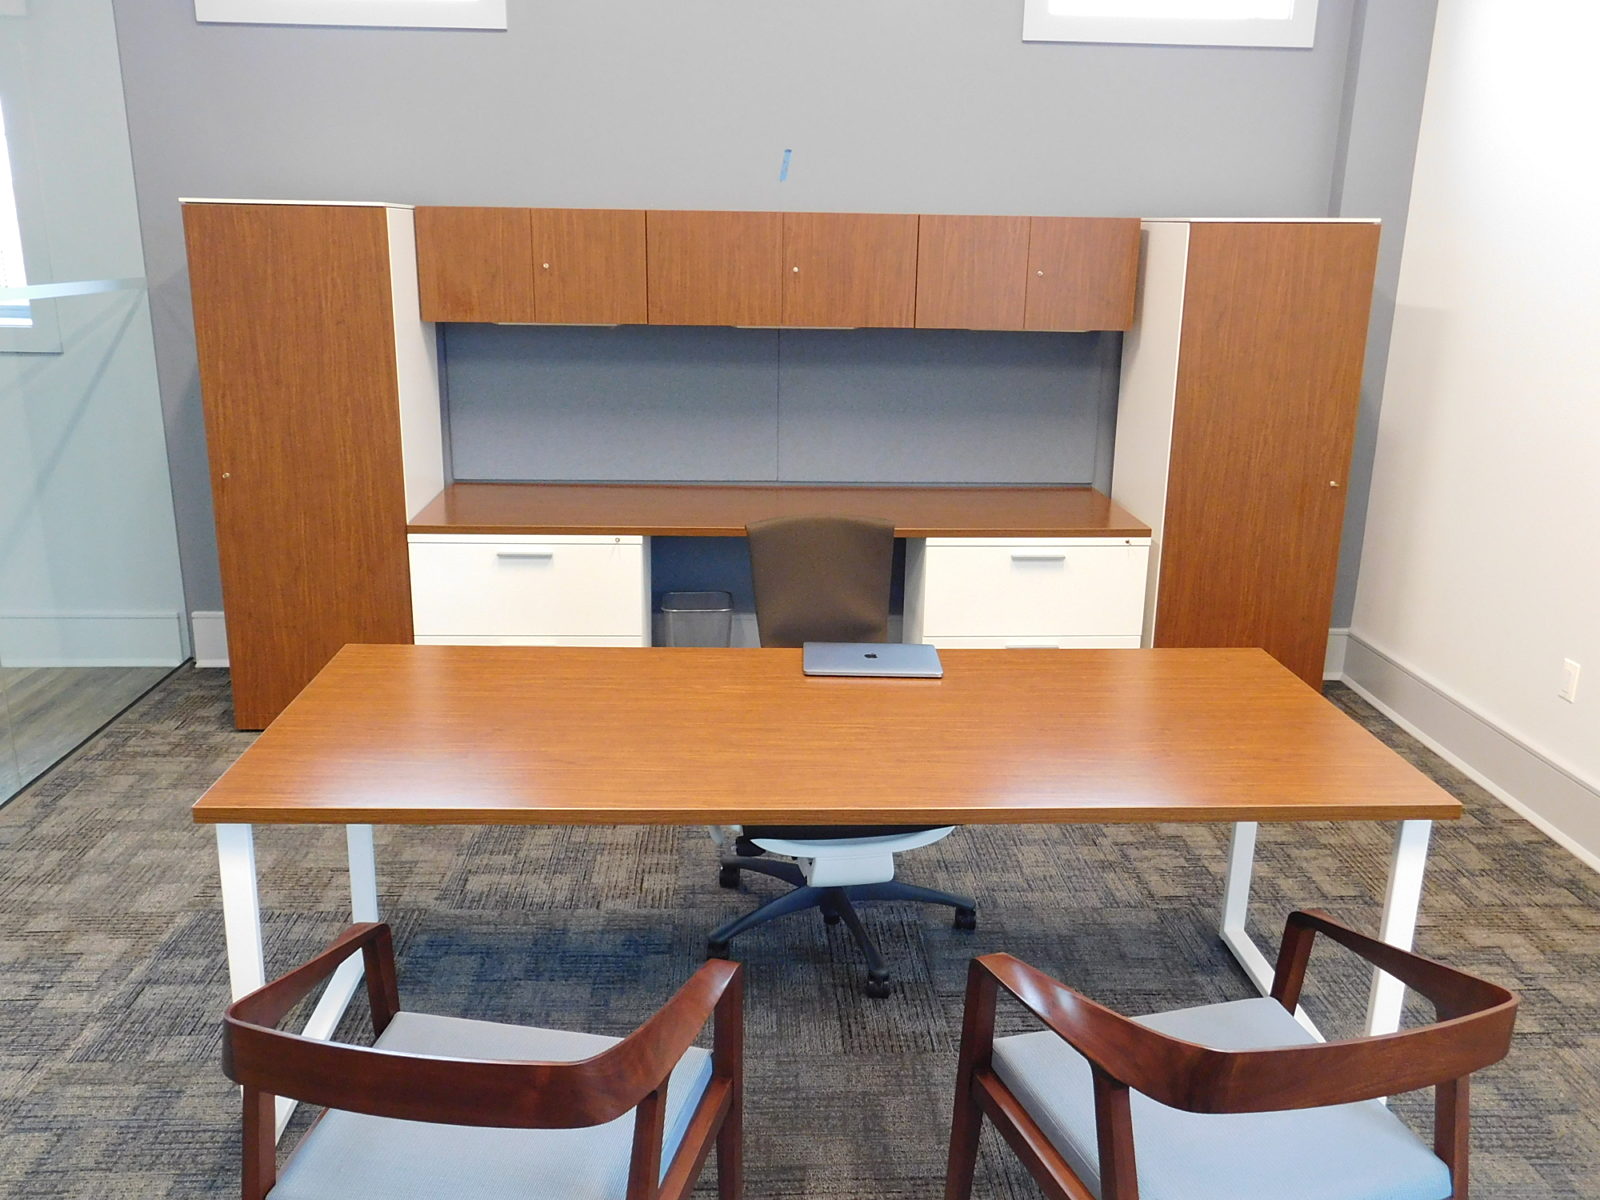 Herman Miller private office, 2-tone with wood and white, table as desk with Crosshatch guest chairs